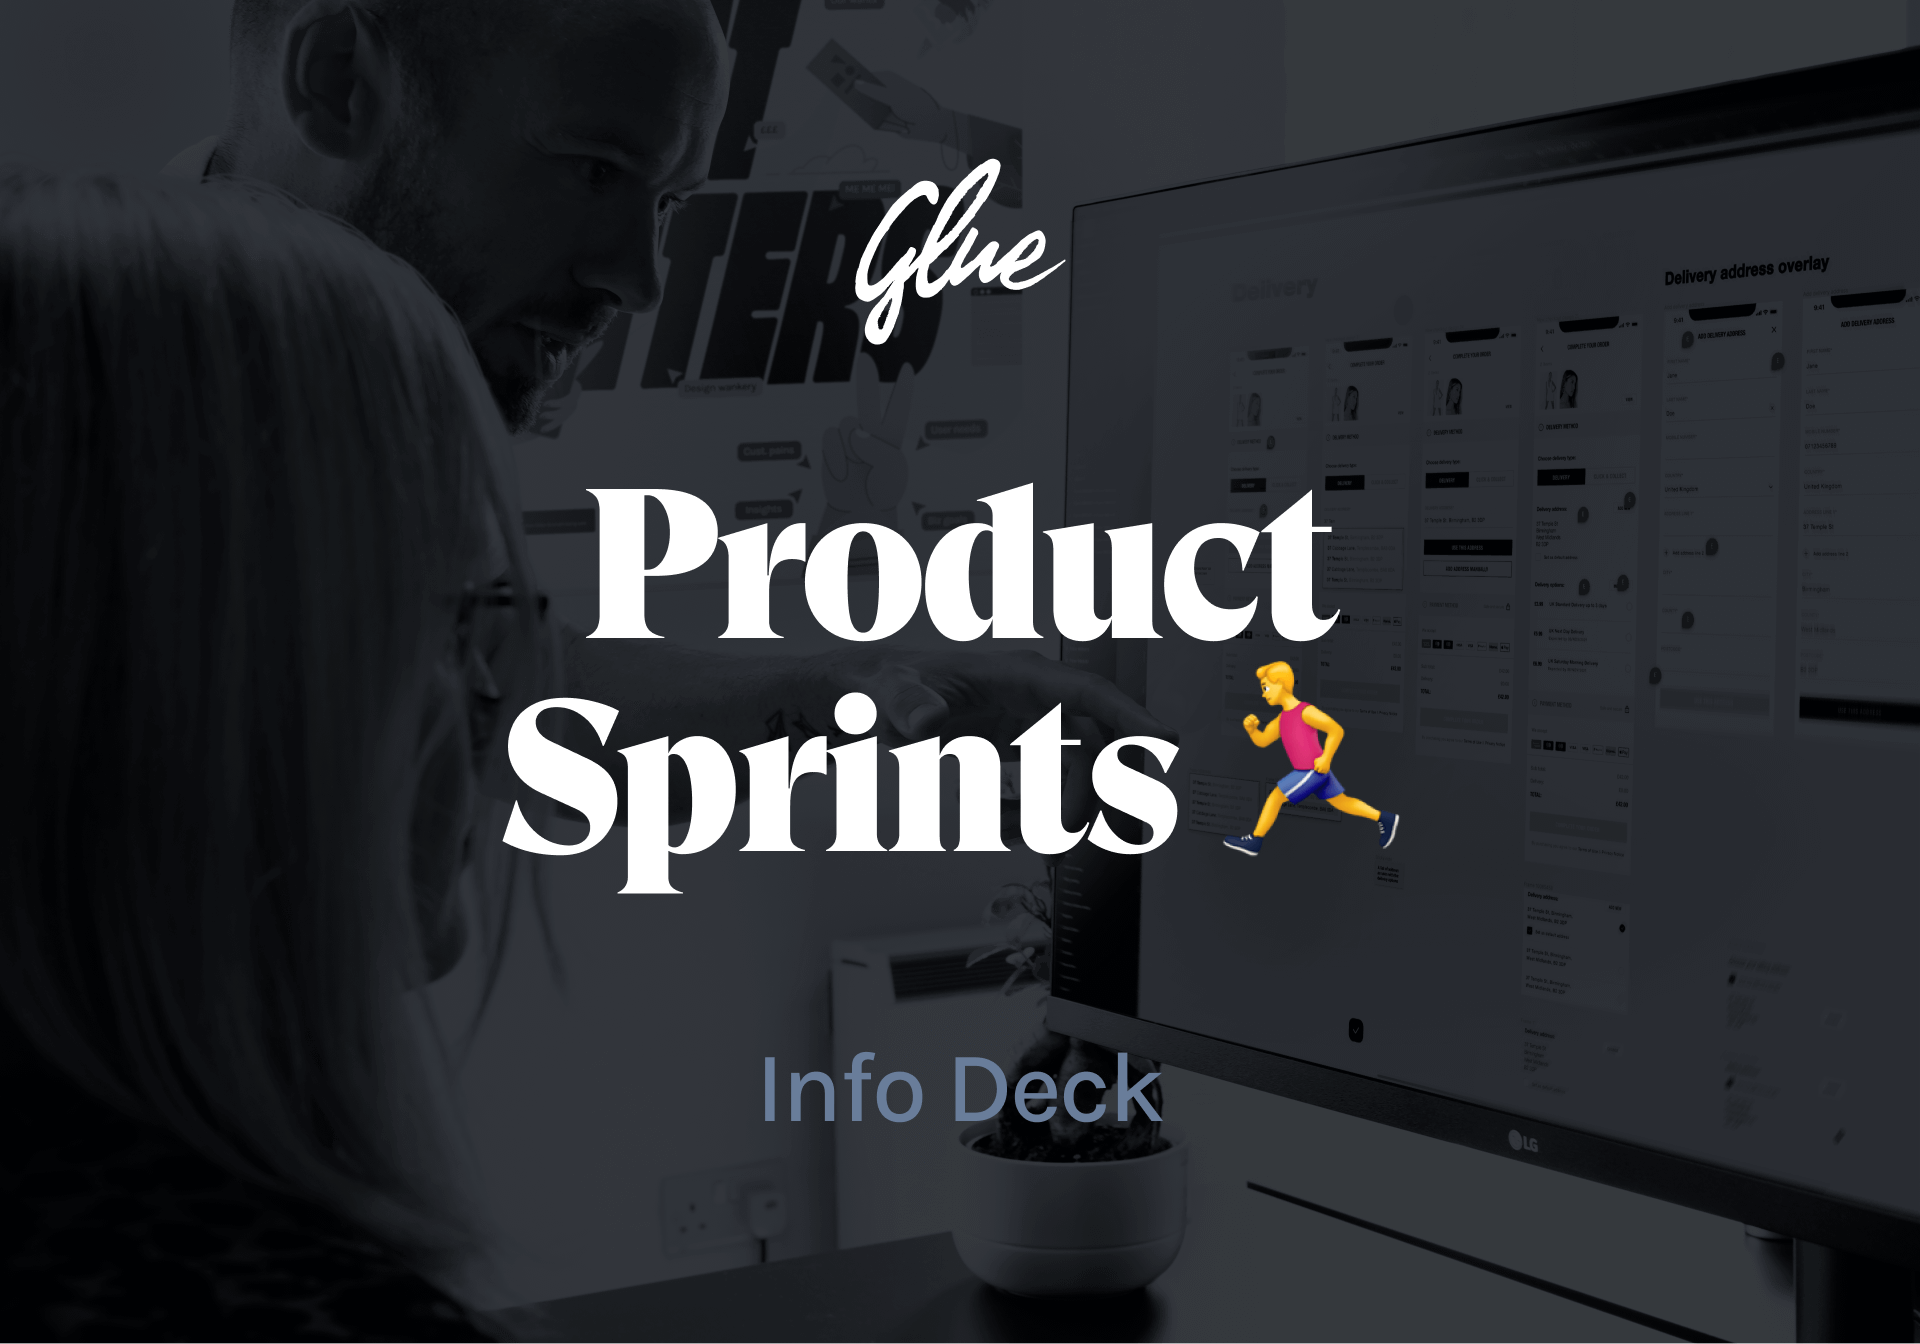 Glue Product sprints info-deck cover